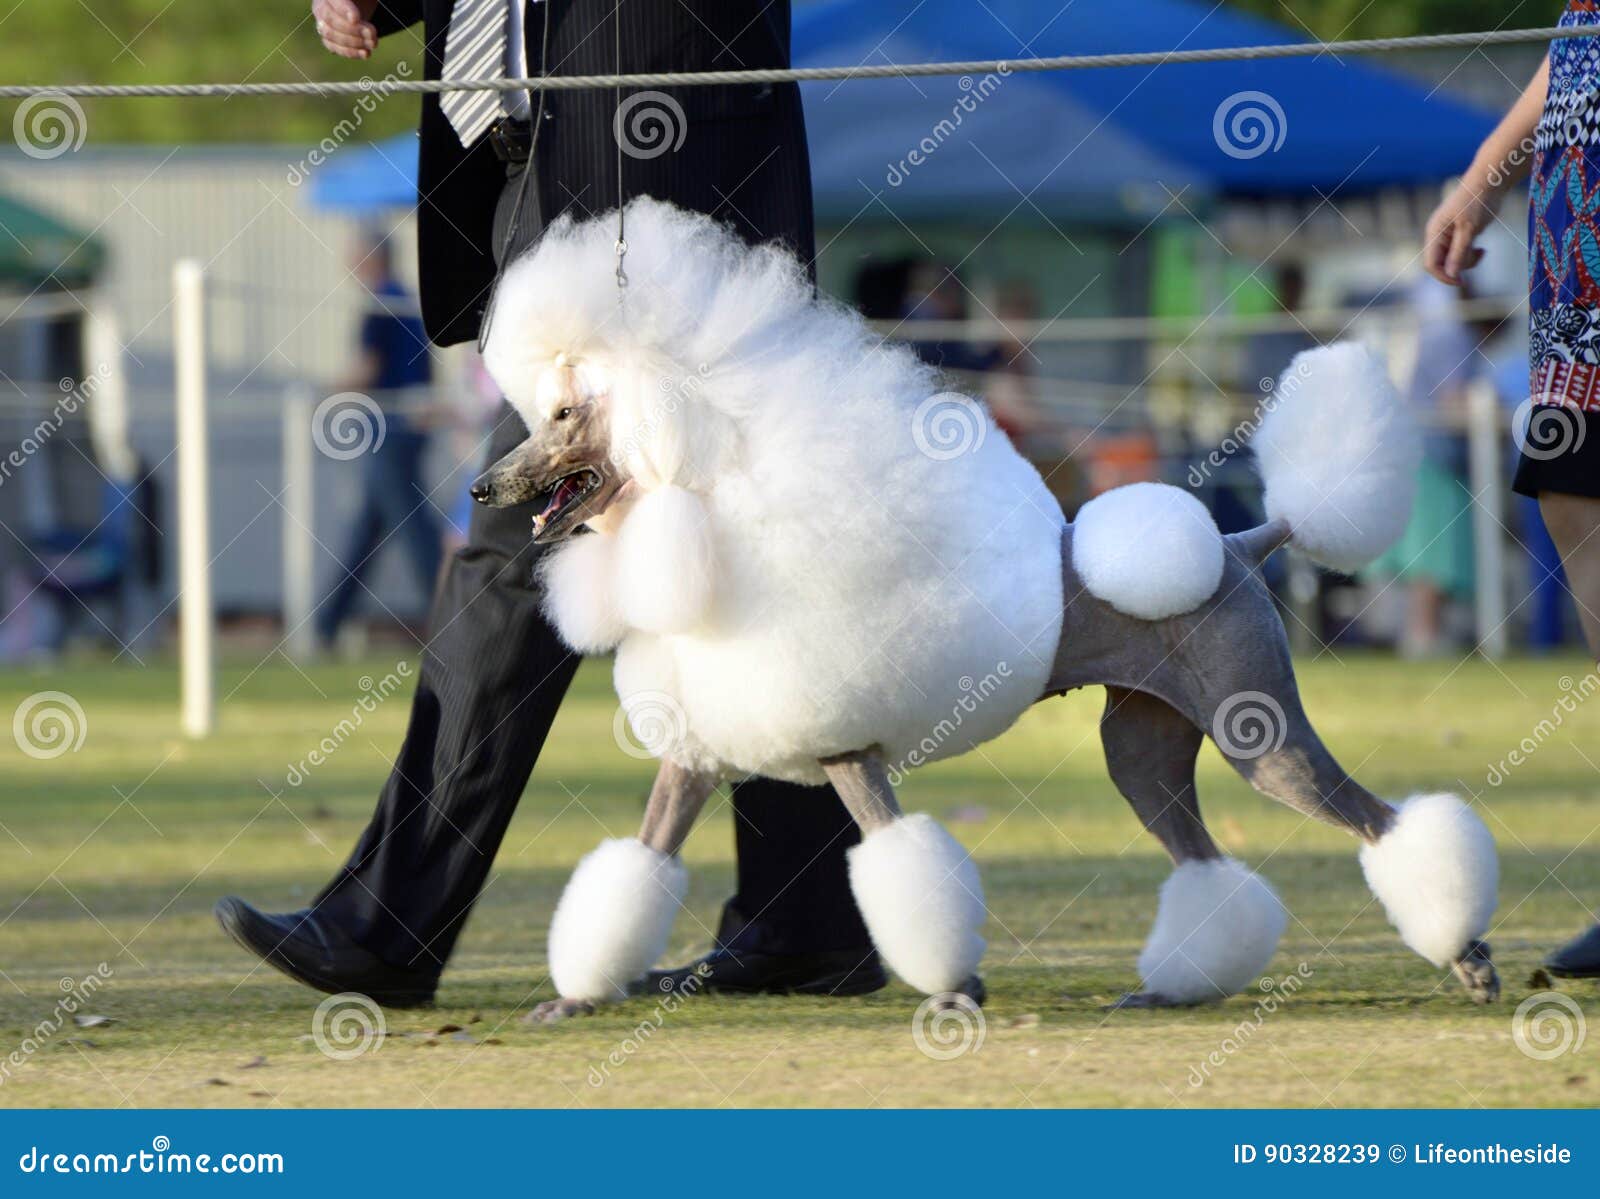 Stunning White Poodle Show Ring of Dog Show Stock Image - Image of ankc, attributes: 90328239